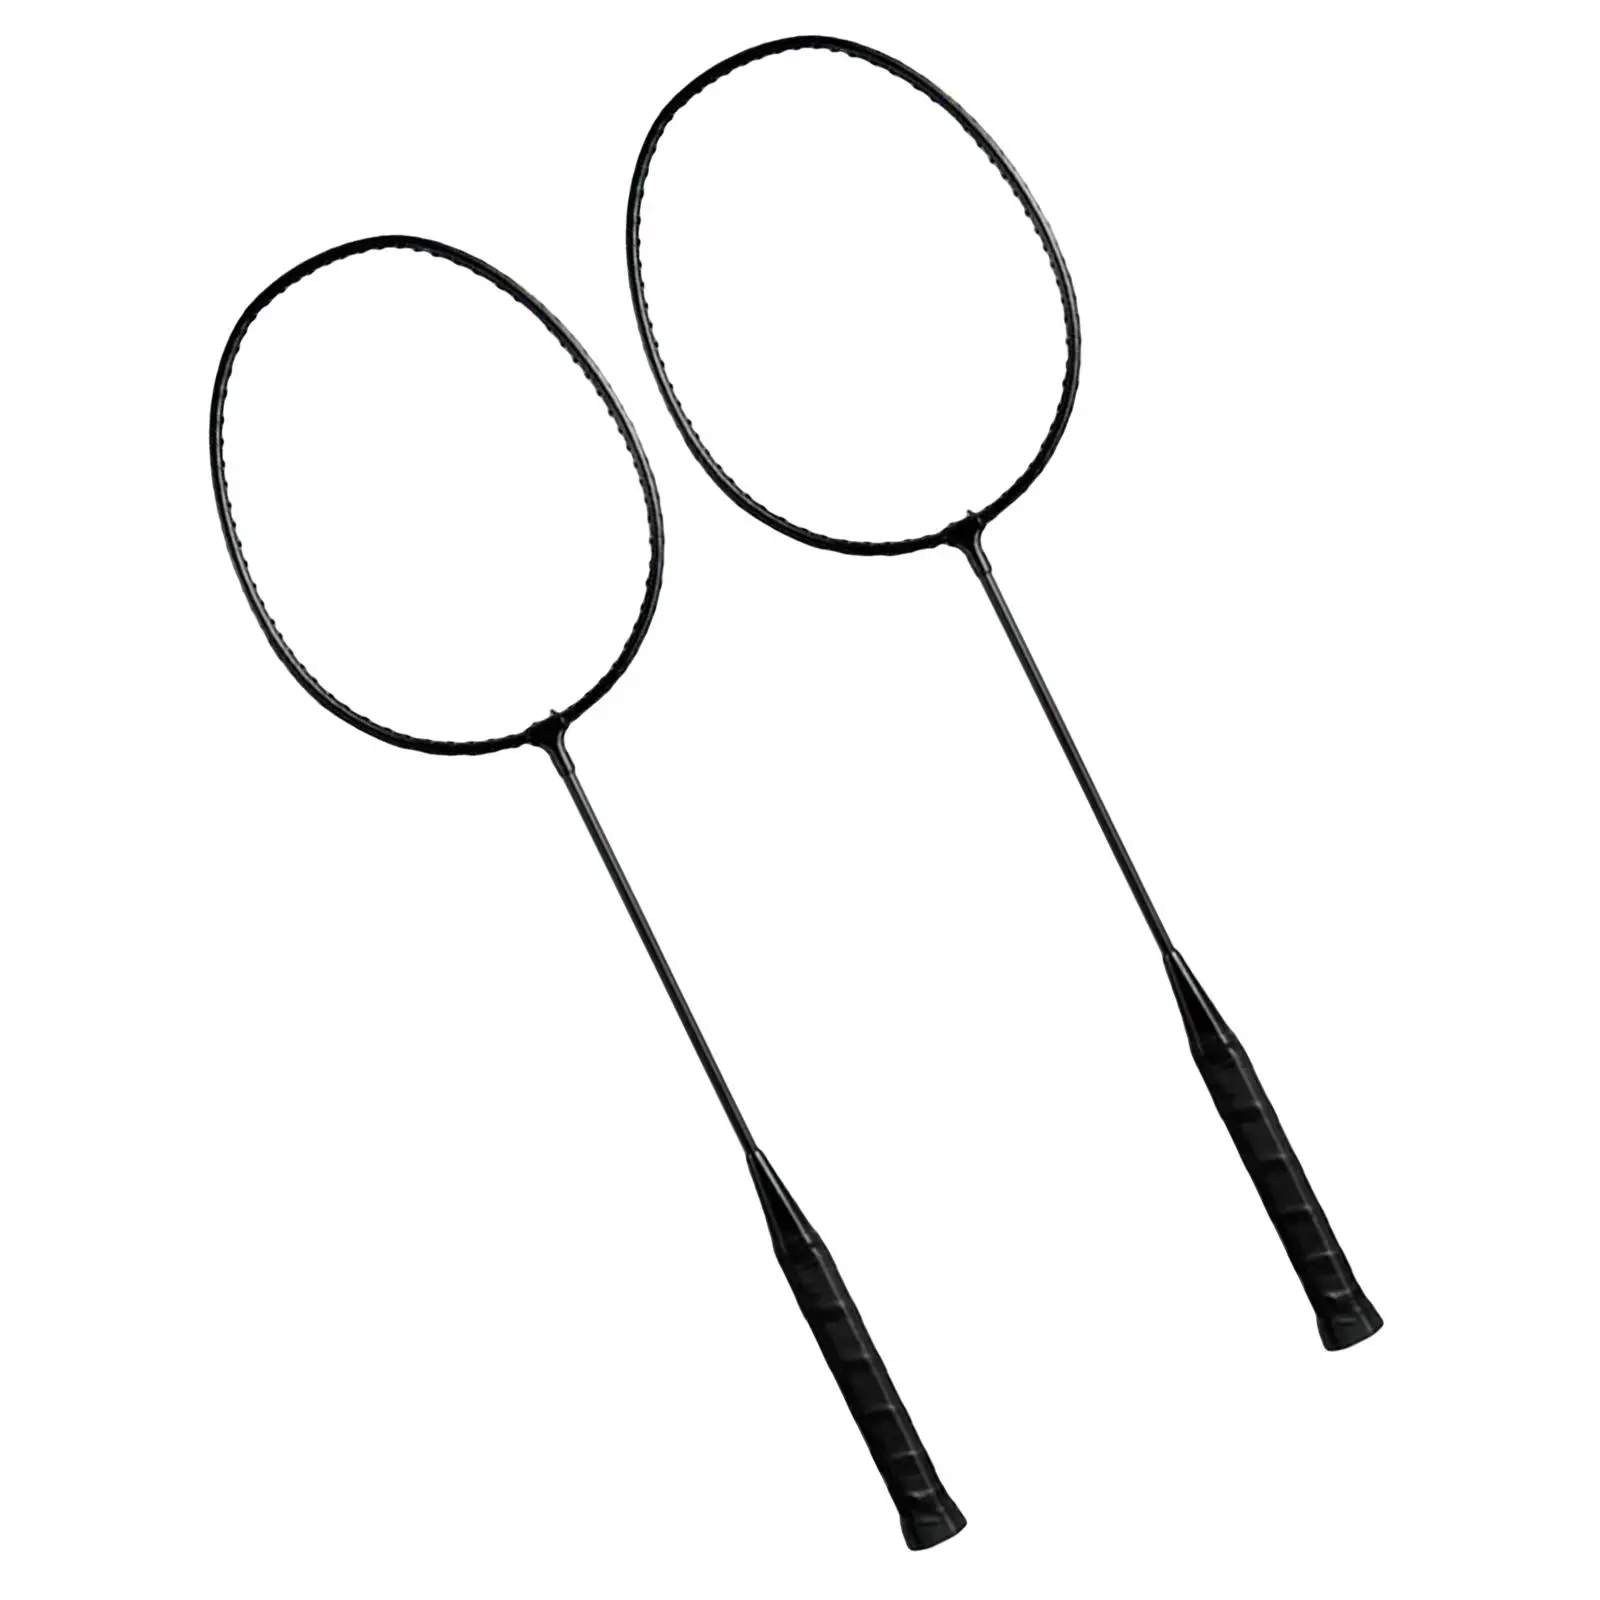 2x Badminton Rackets Set Double Racquets for Game Backyards Indoor Kids Adults Family